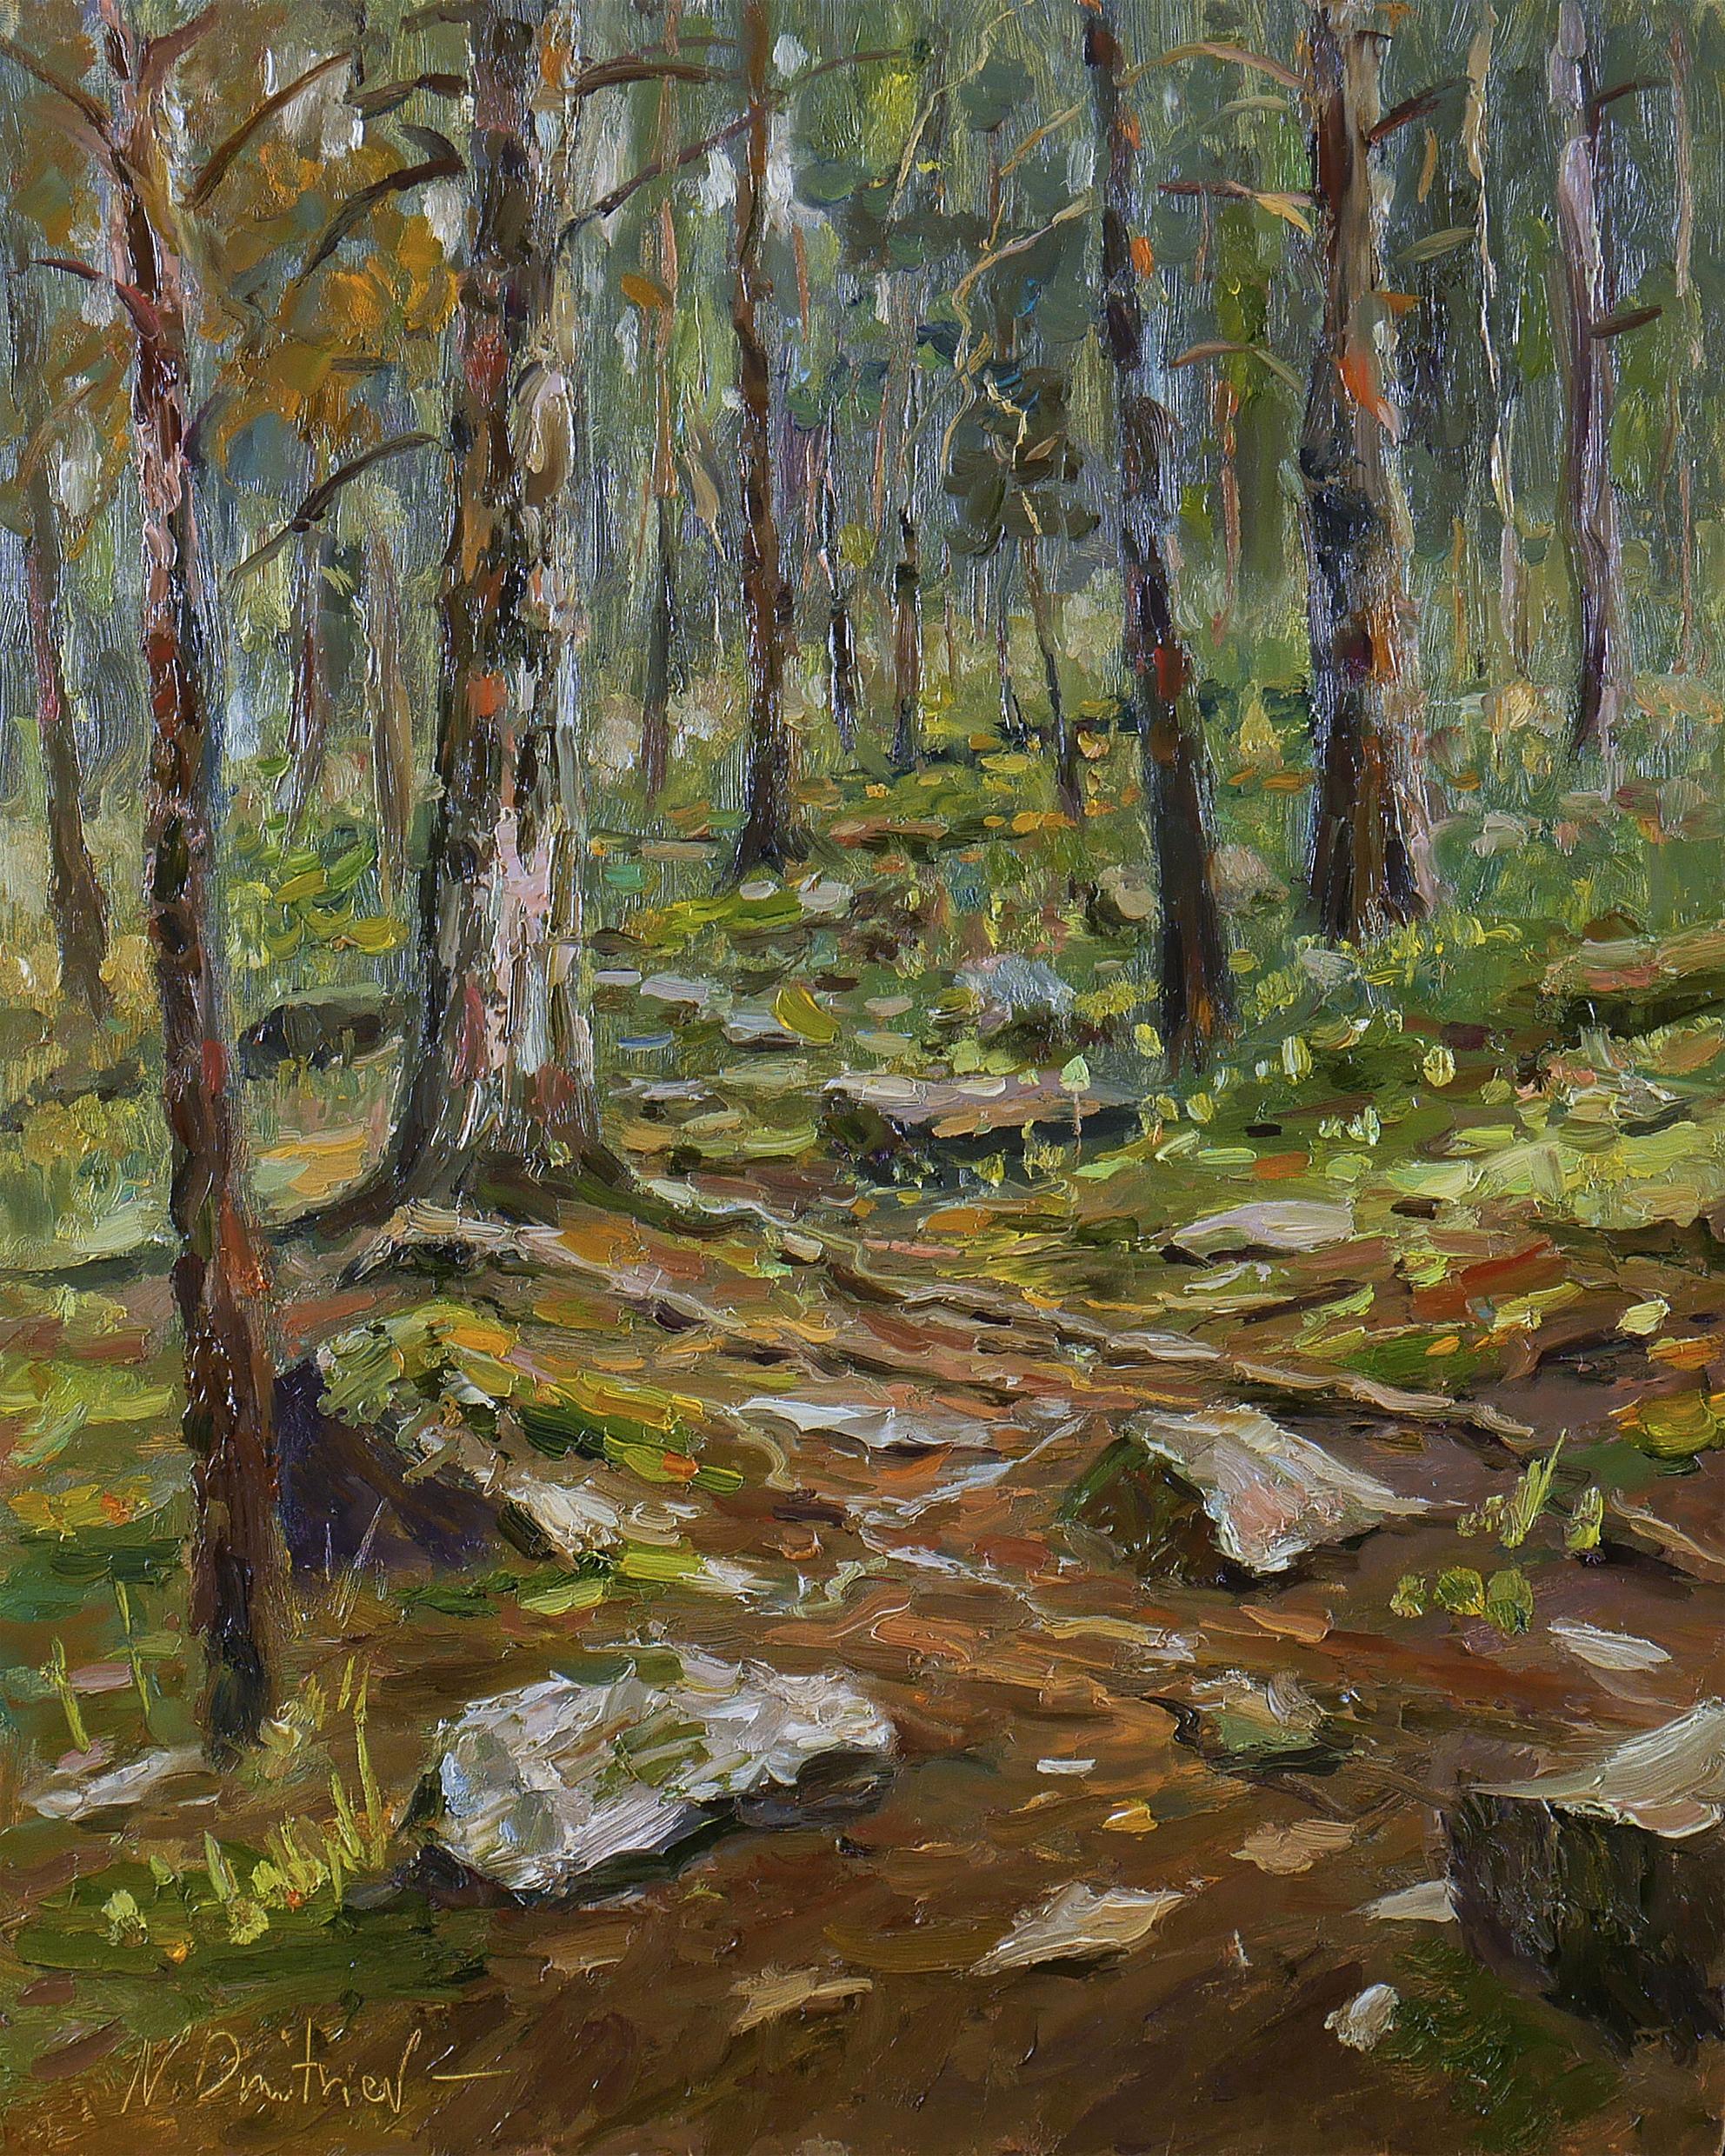 Forest of stones - forest landscape painting